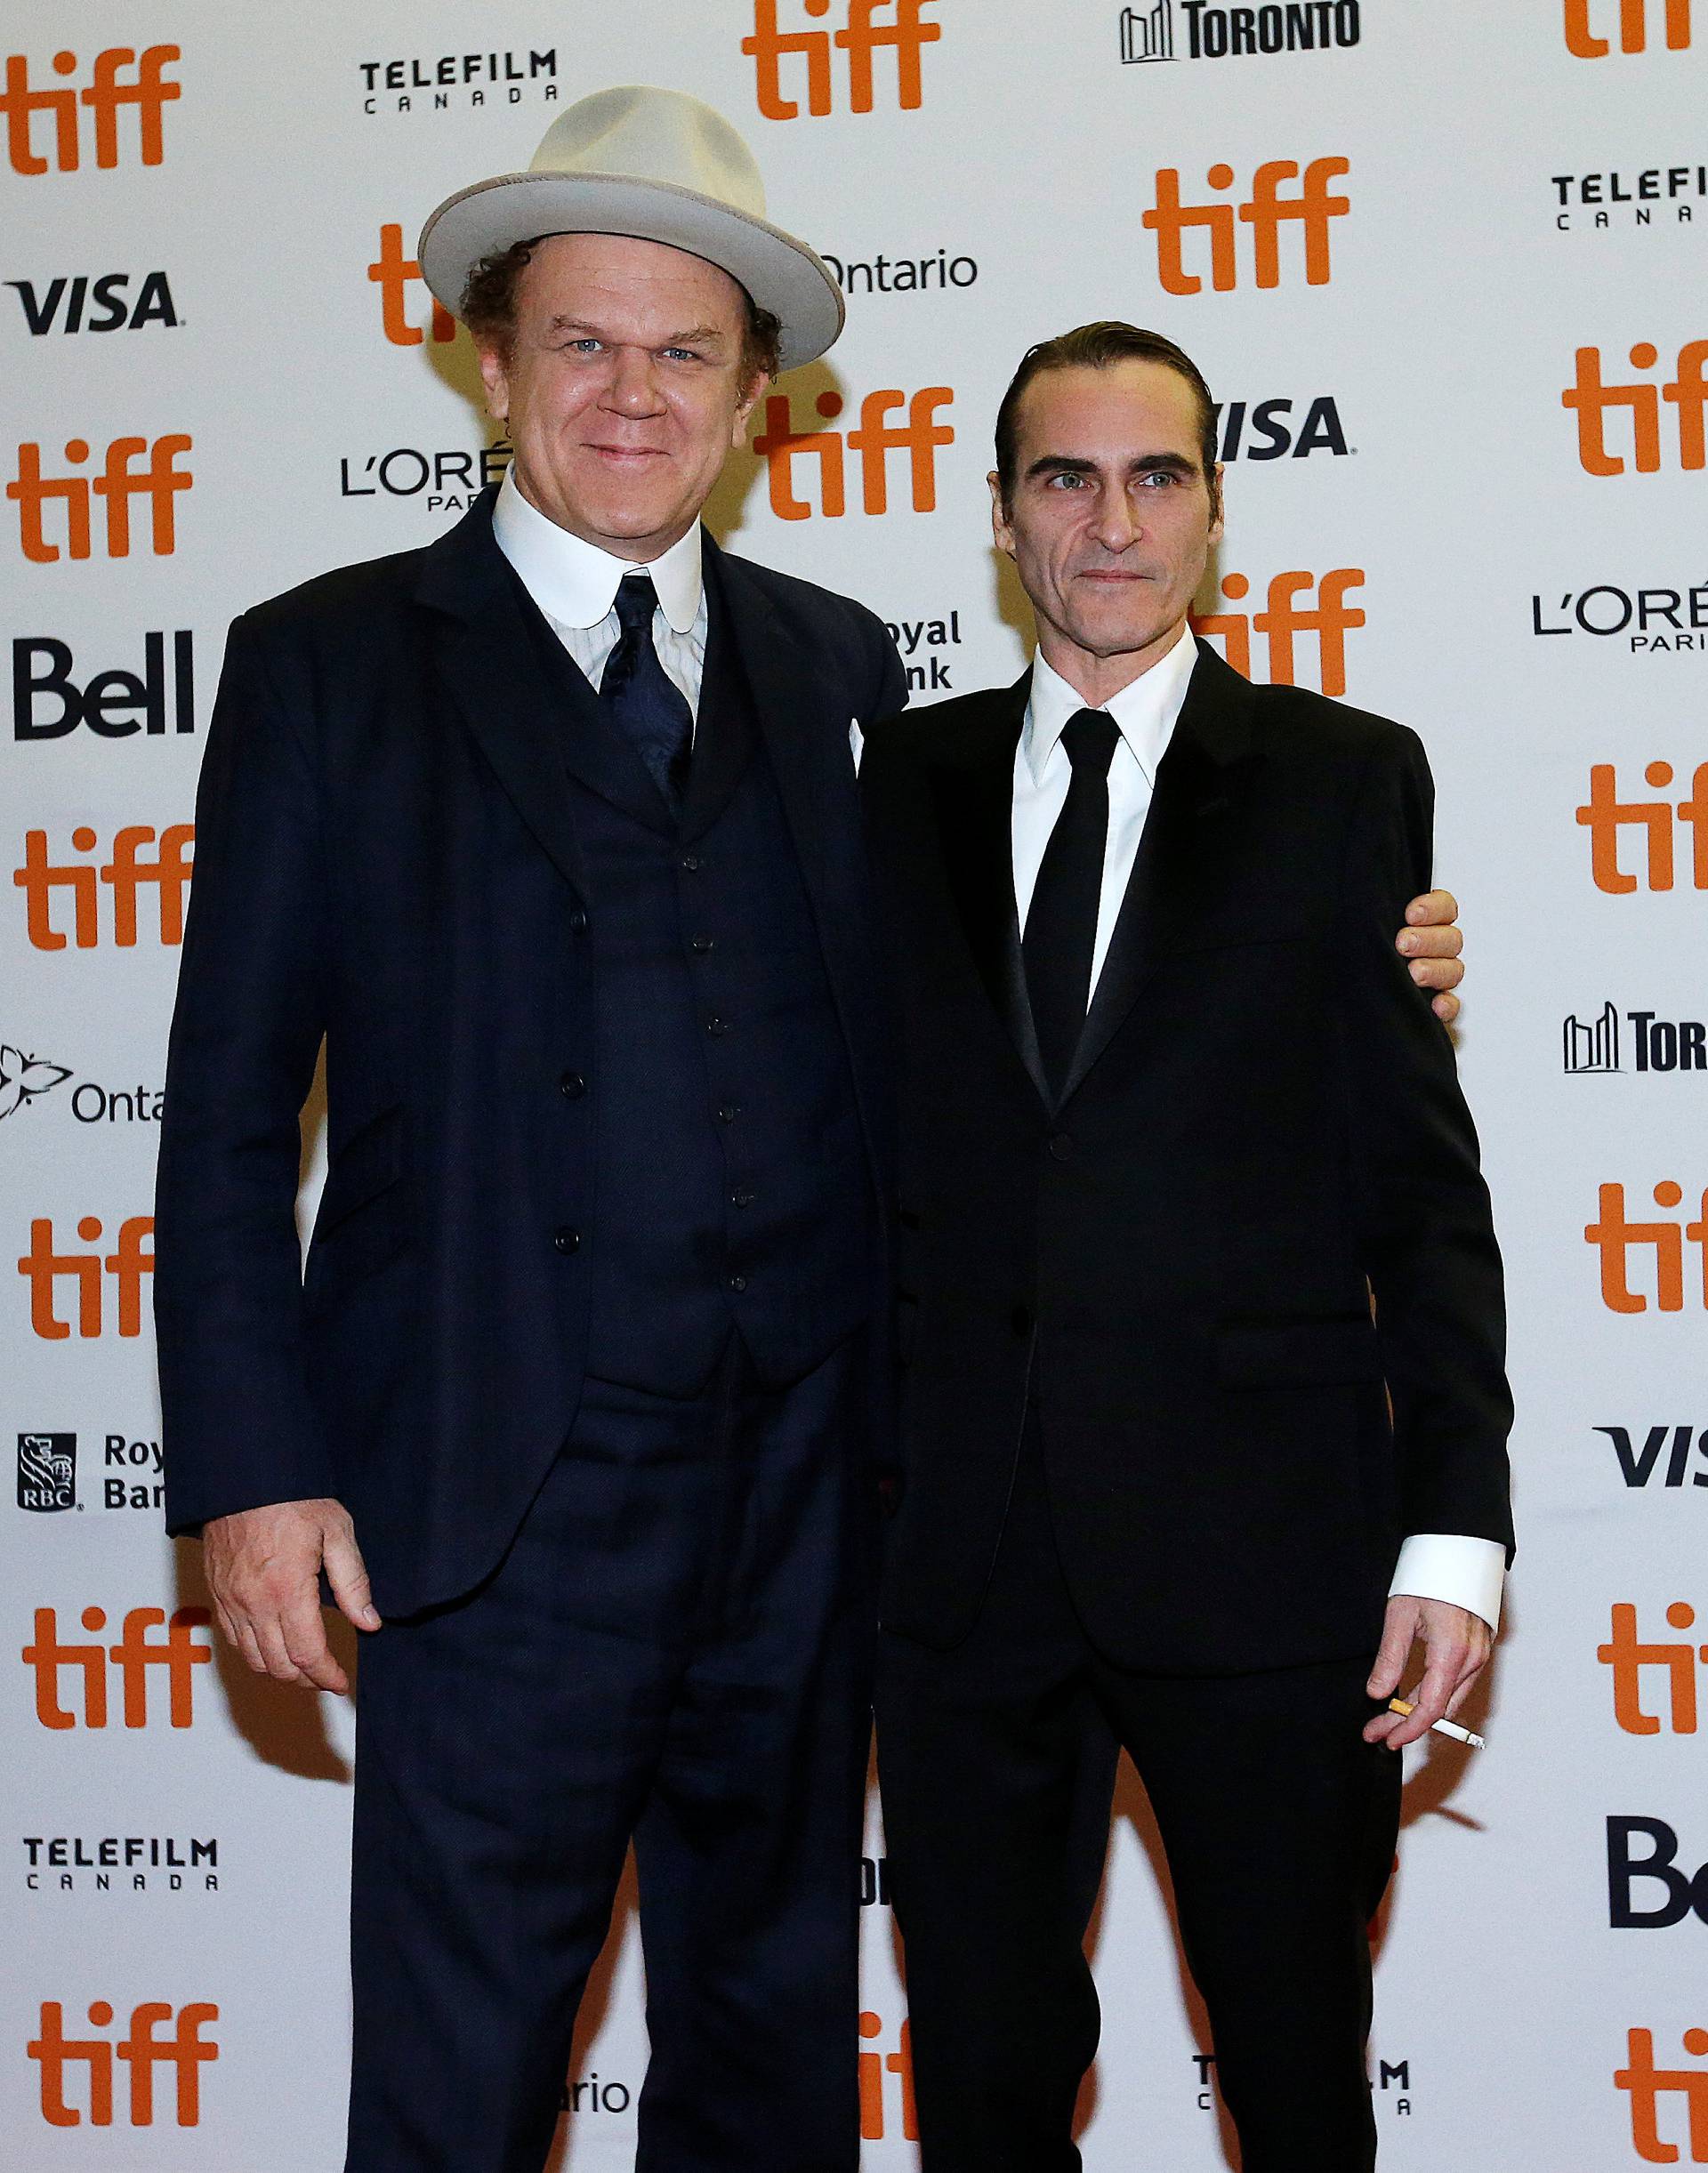 Actors John C. Reilly and Joaquin Phoenix arrive for the world premiere of The Sisters Brothers at the Toronto International Film Festival (TIFF) in Toronto